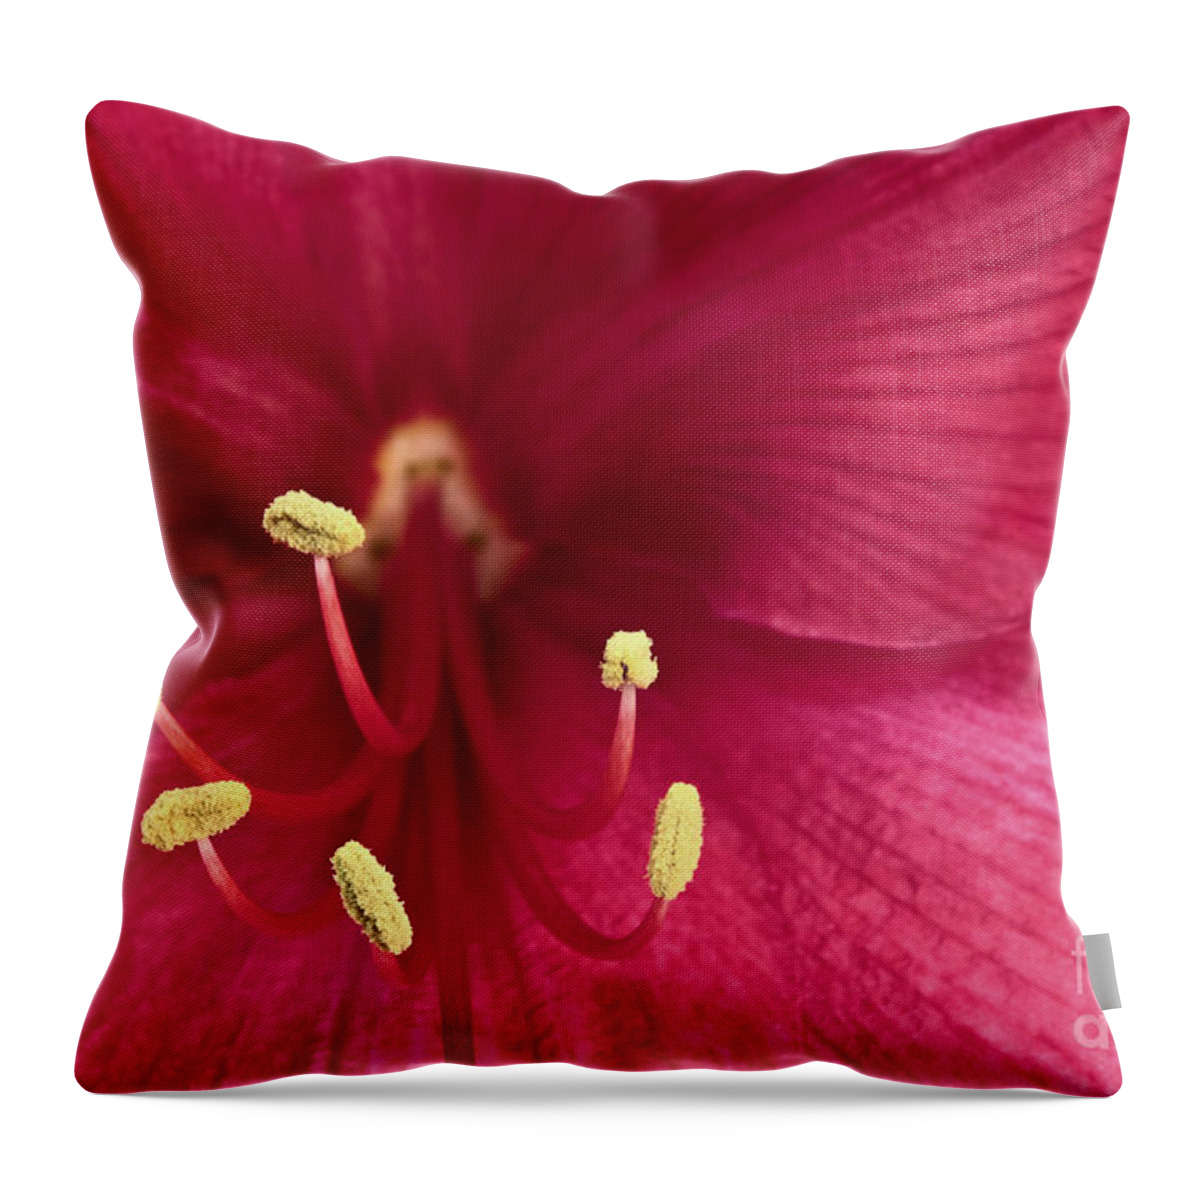 Amaryllis Throw Pillow featuring the photograph Pink Amaryllis by Pattie Calfy